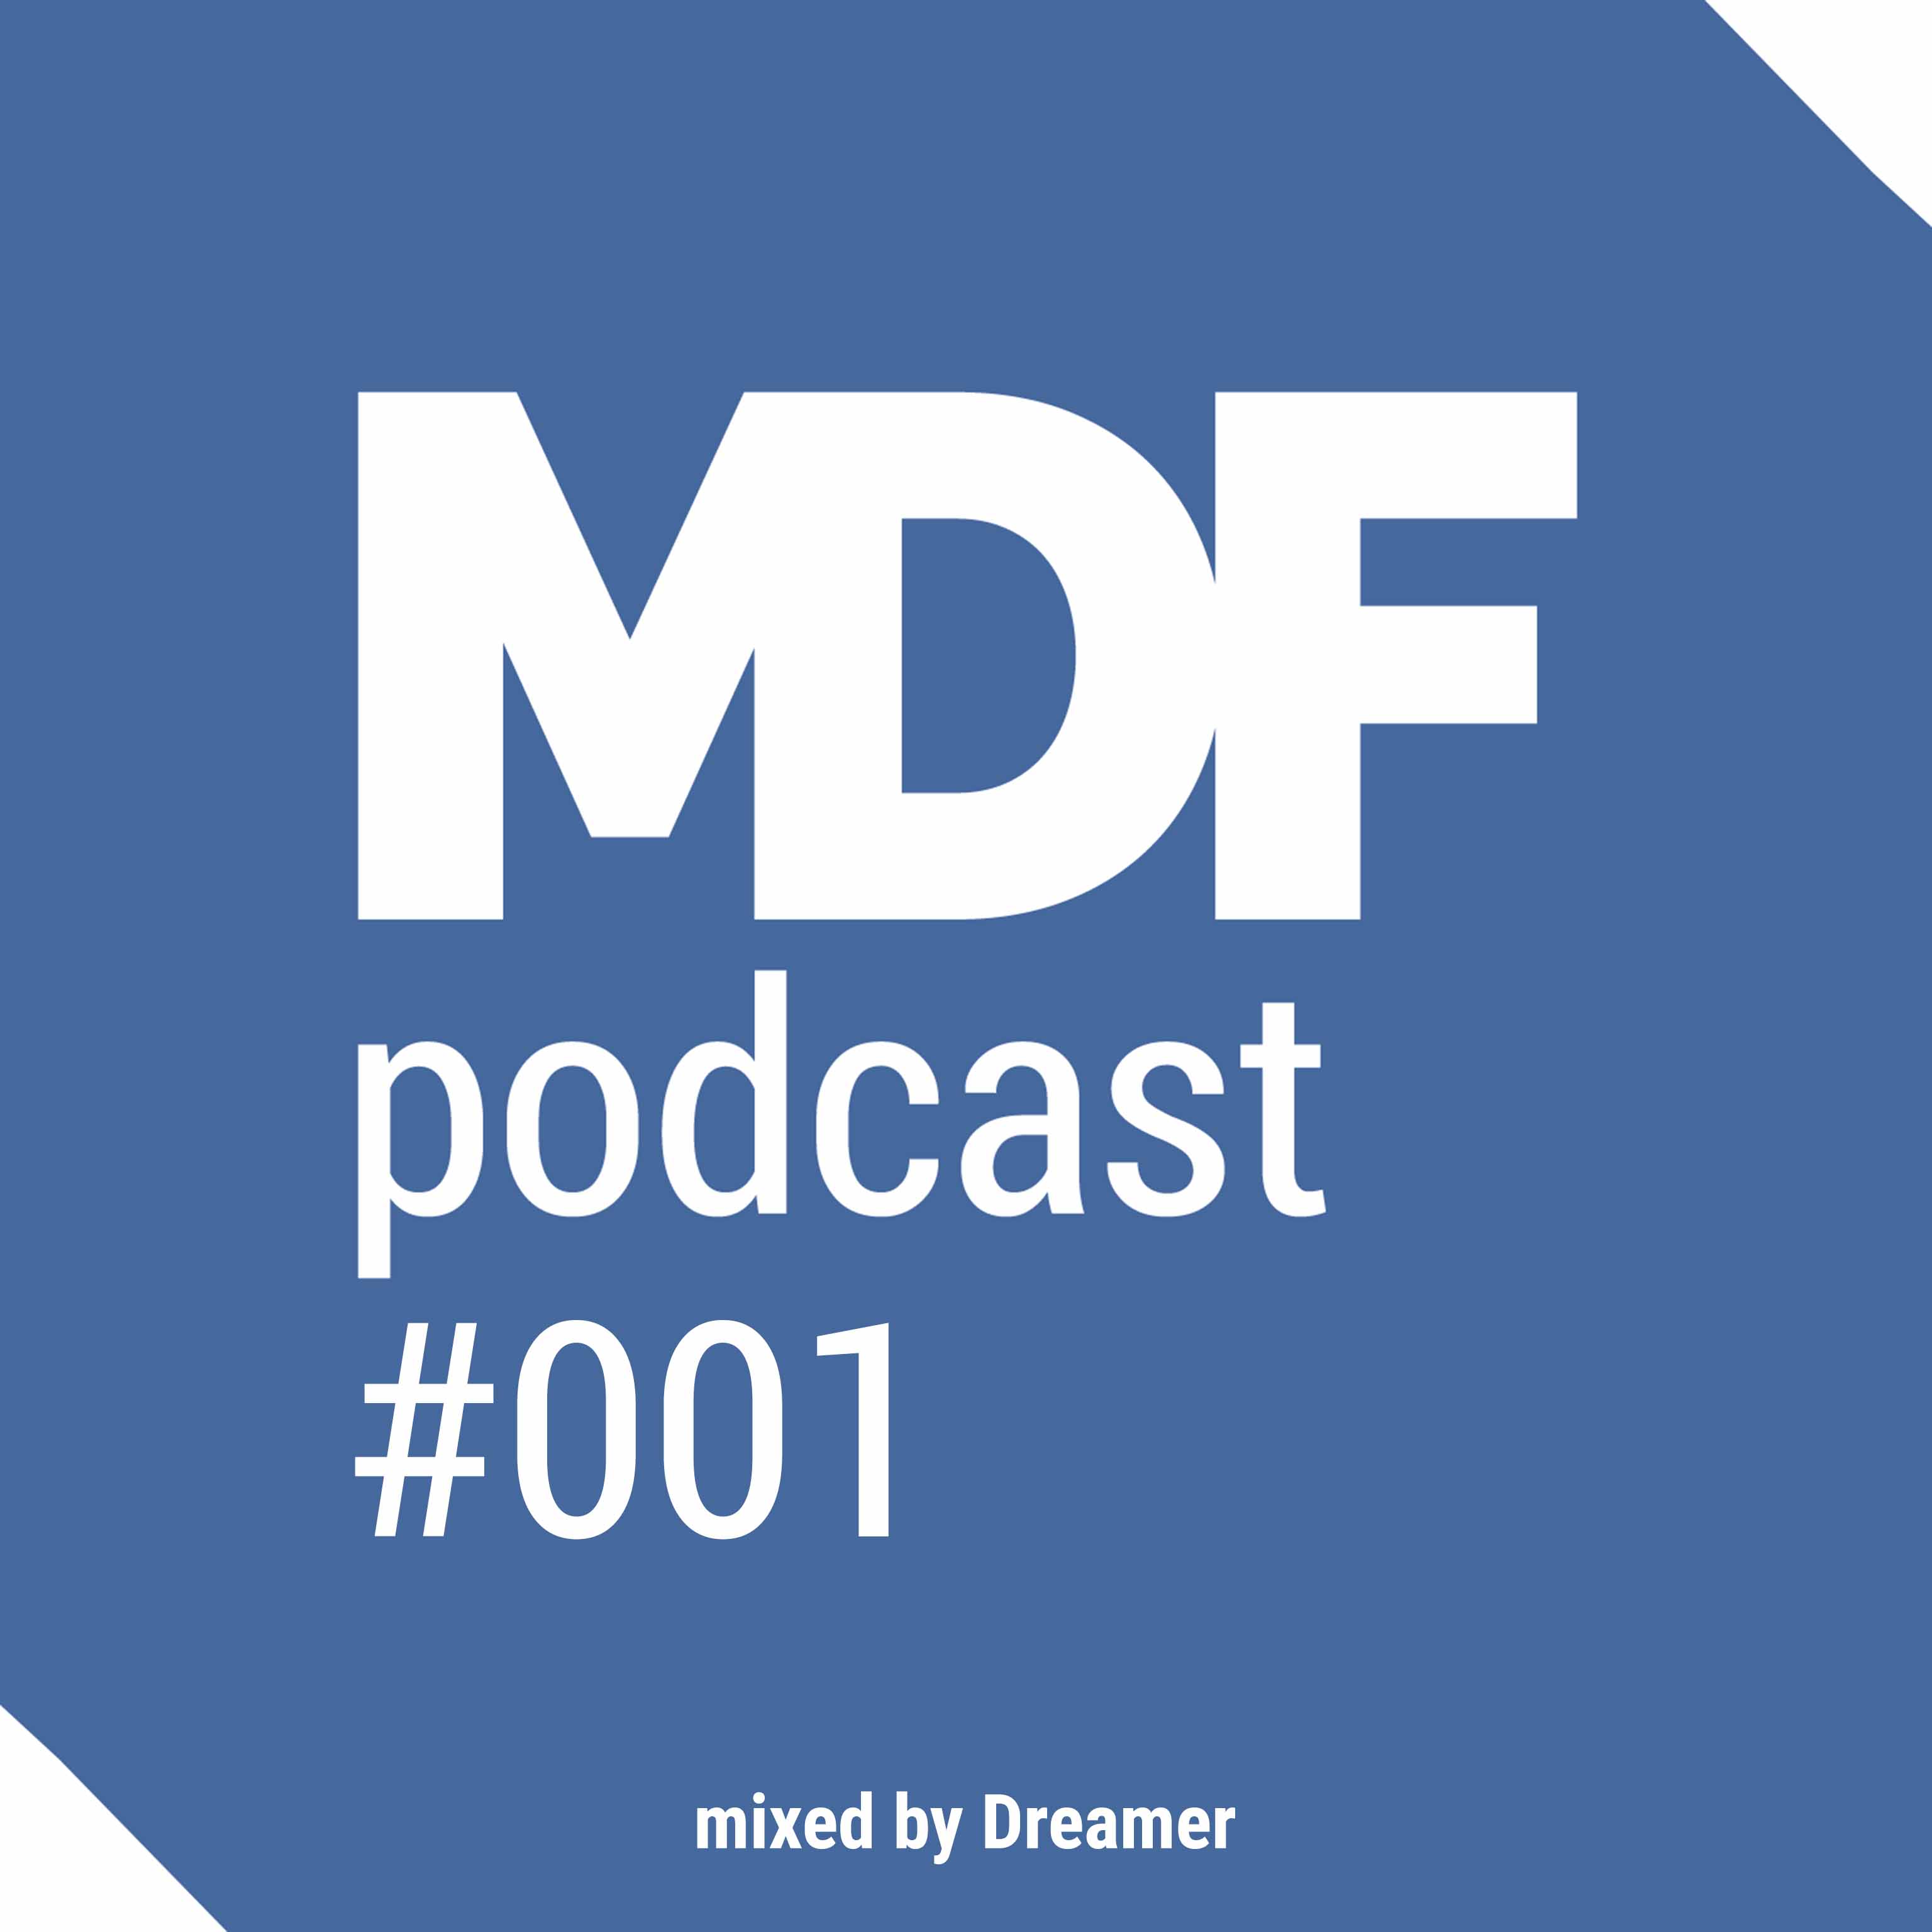 MDF Podcast oo1